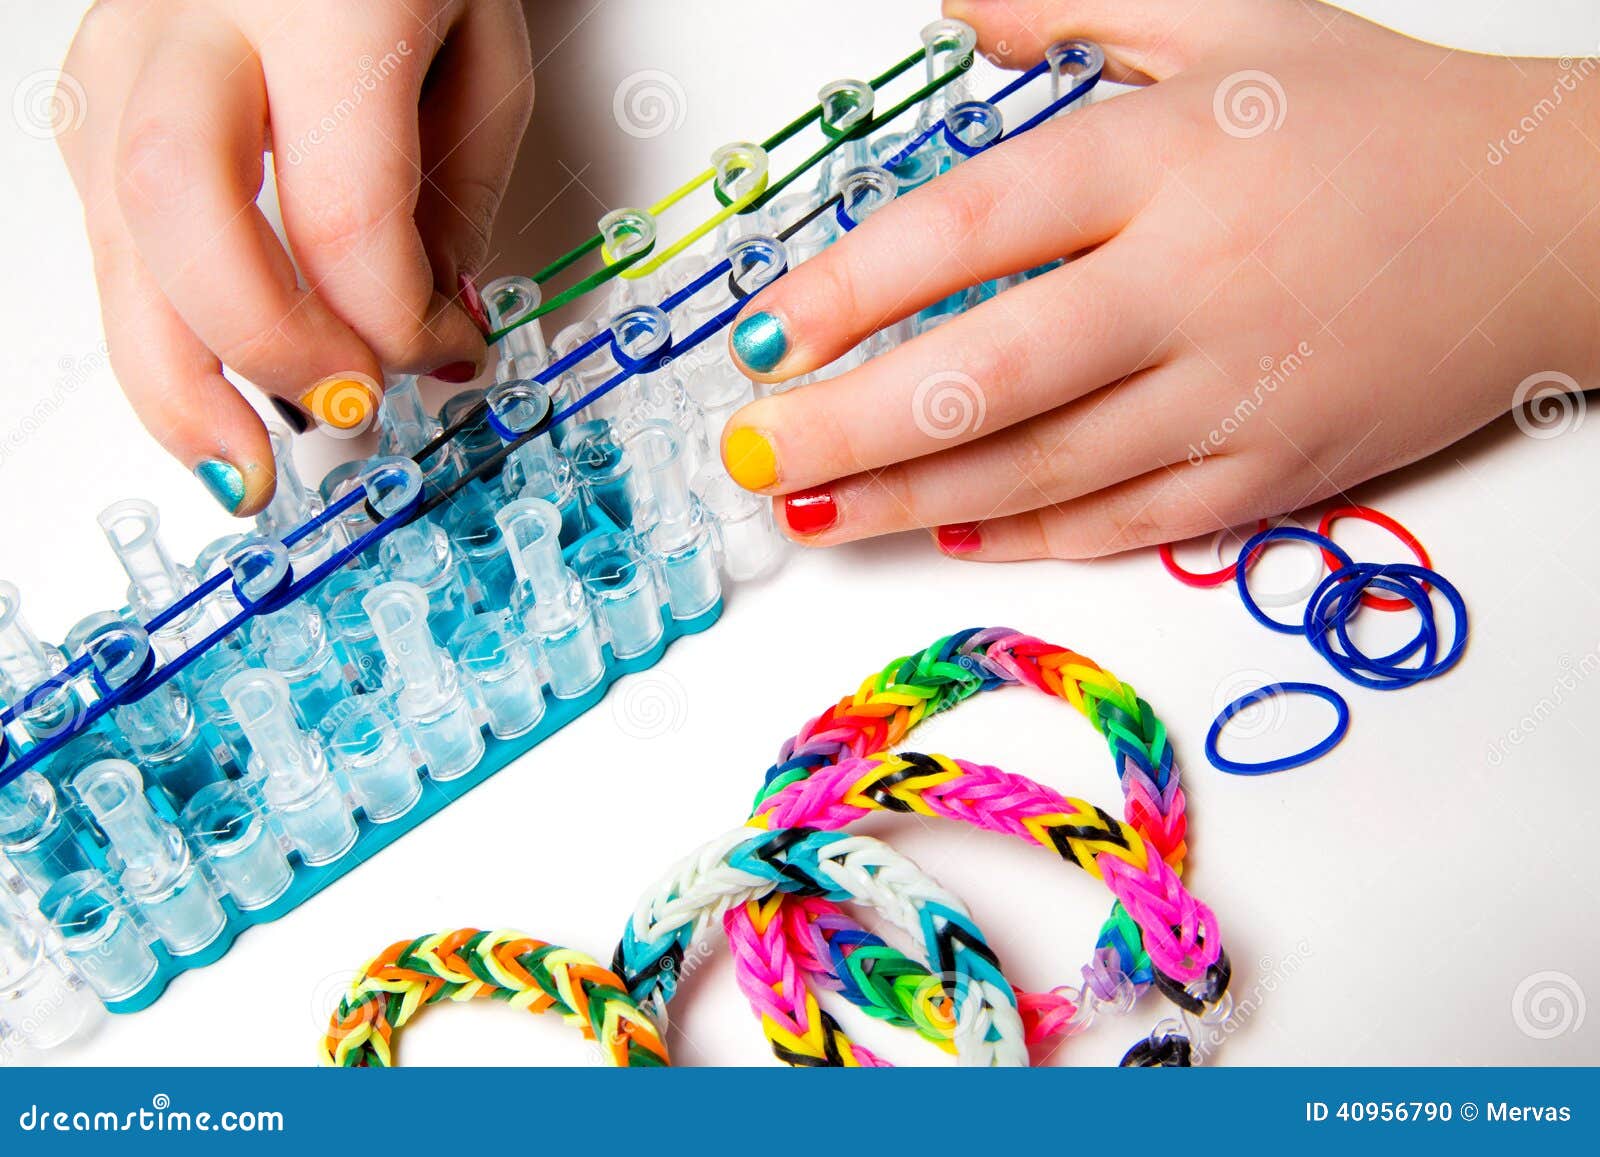 DIY Loom Bracelets: Easy Tutorials for Beginners | A Step-by-Step Tutorial  Buy Fashion Loom Bands (Jewellery Maker) : https://amzn.to/3qYMF1l  Welcome... | By JK ArtsFacebook